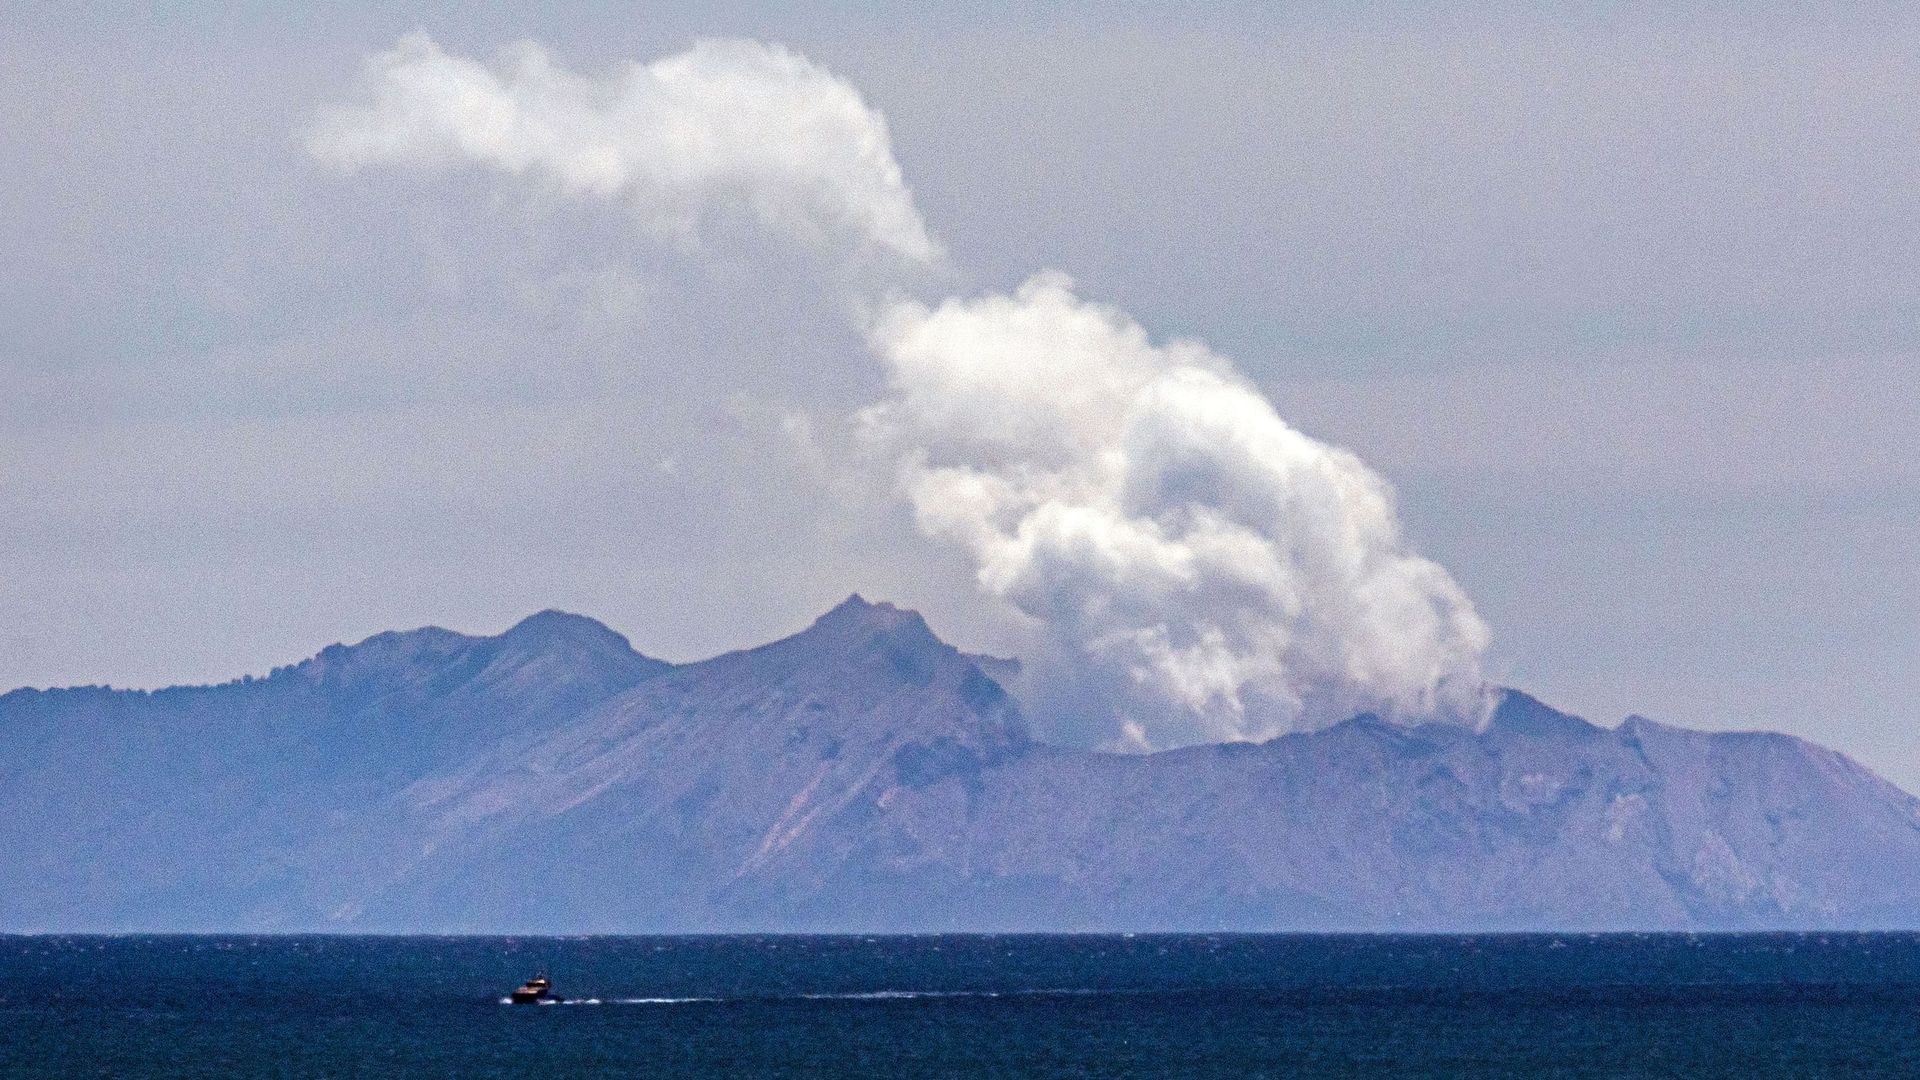  Steam rises from the White Island volcano following the December 9 volcanic eruption, in Whakatane on December 11, 2019. 